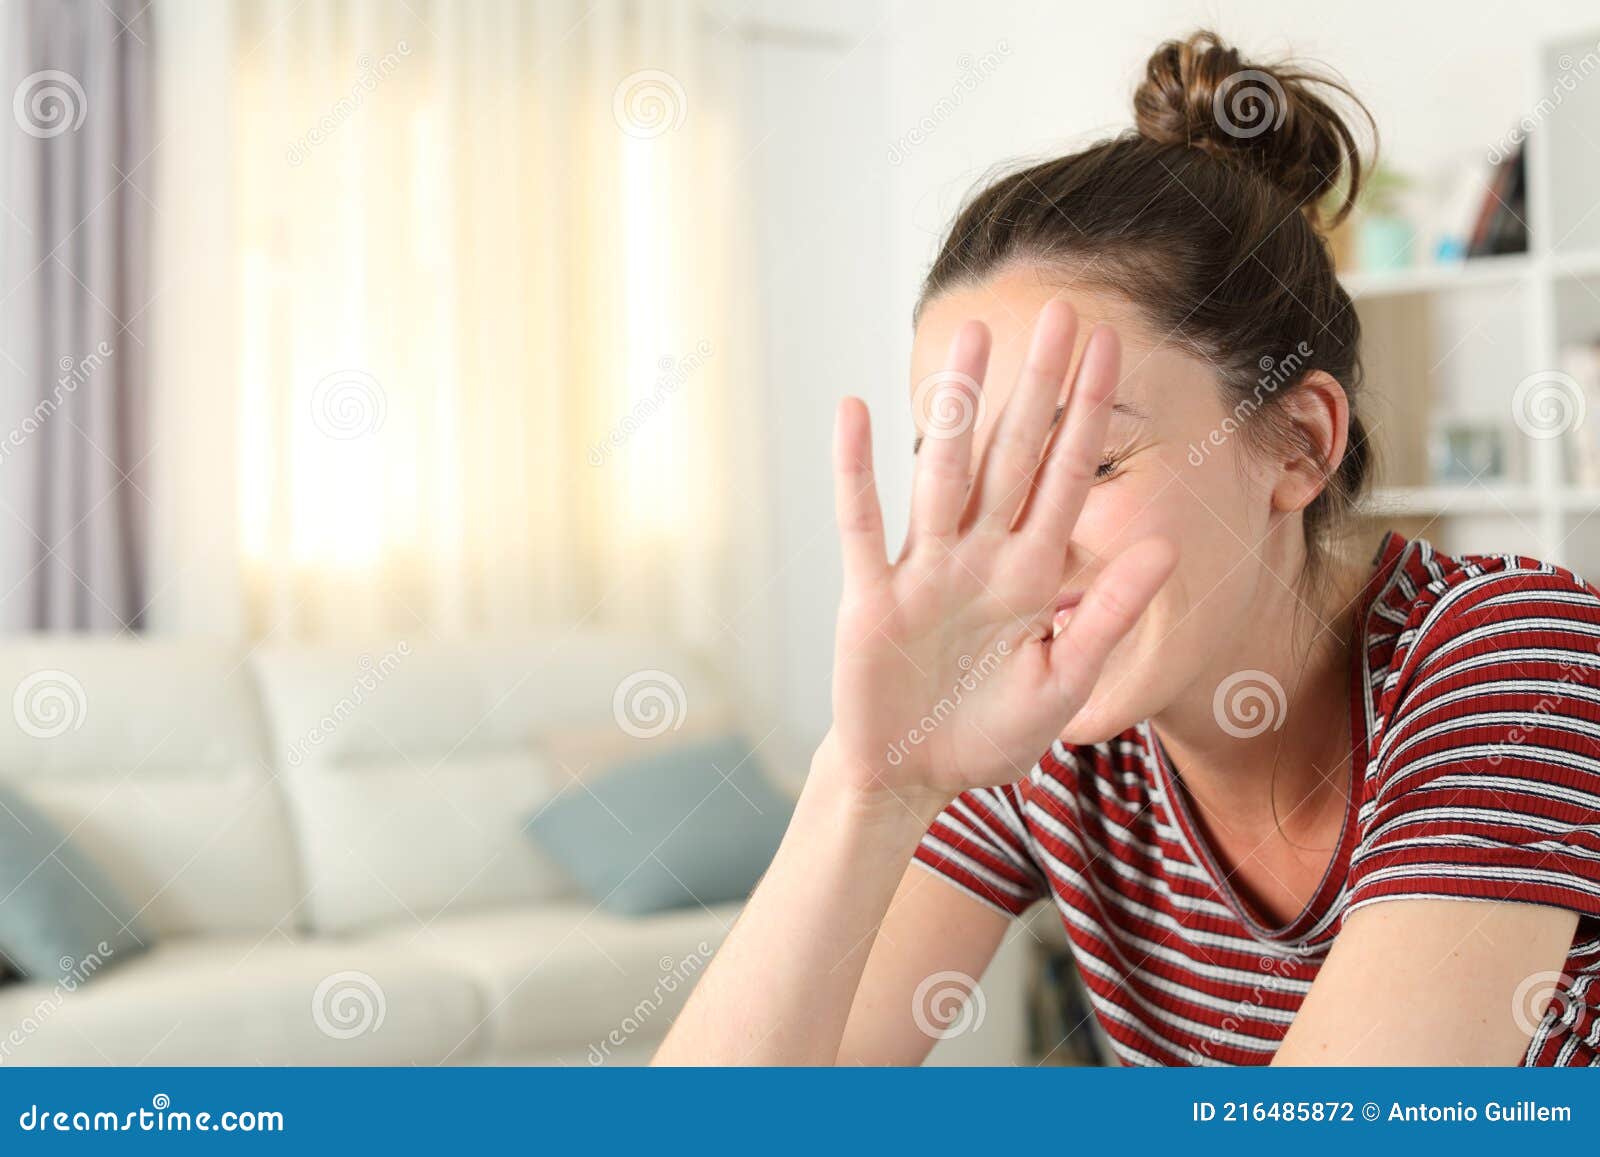 embarrassed woman avoiding photo shoot at home